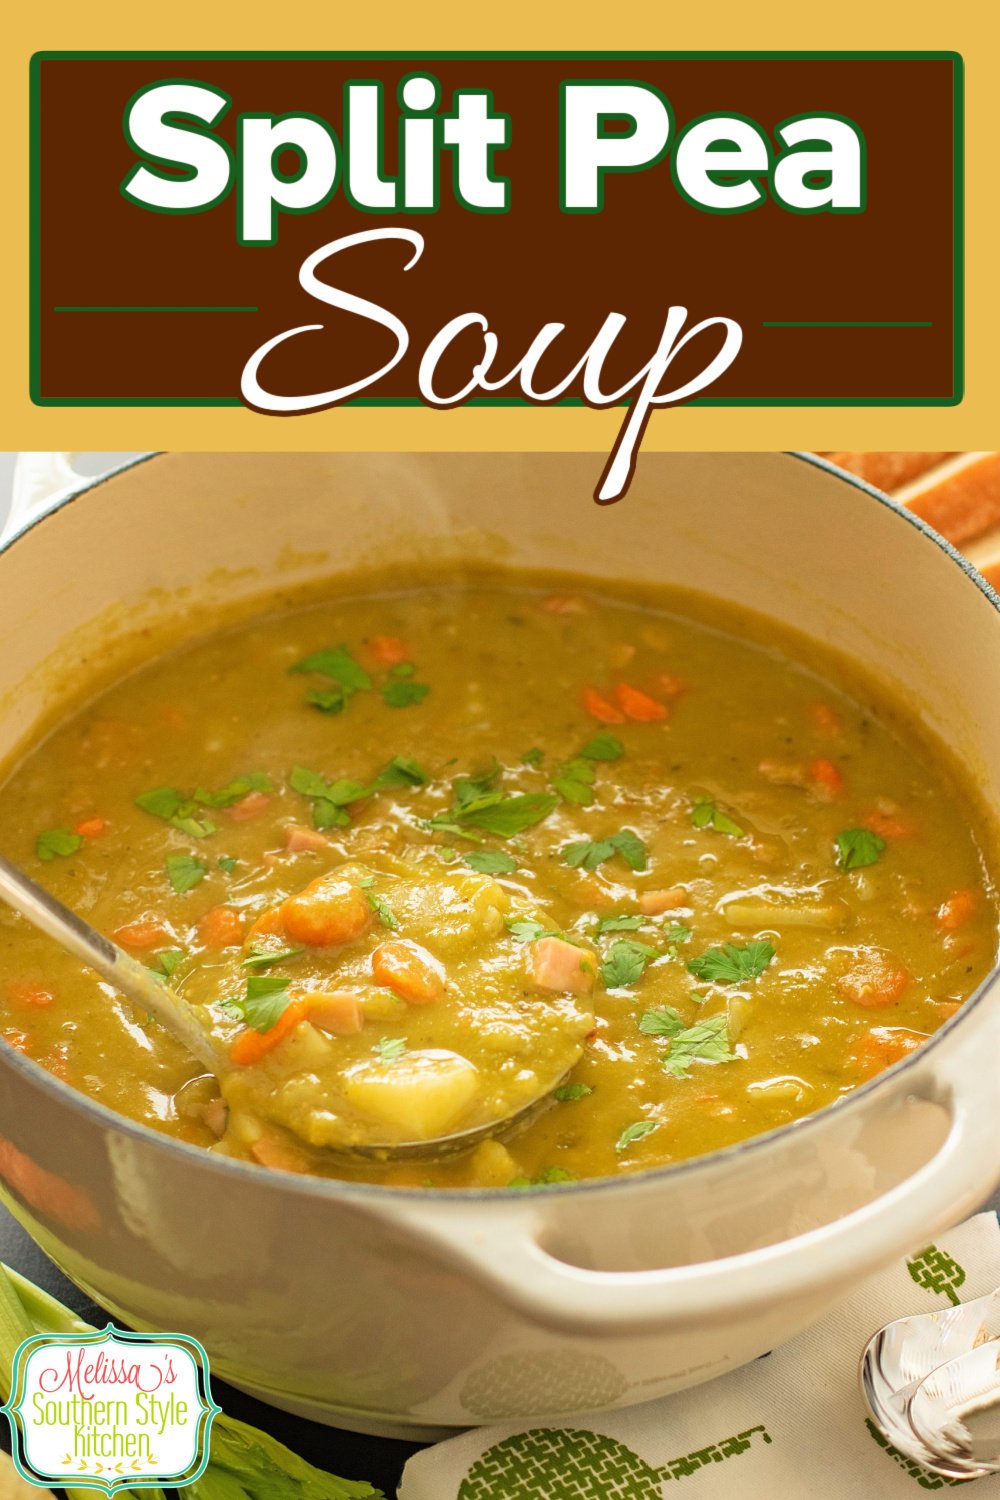 This recipe for Split Pea Soup is delicious served with a side of bread for dipping in the flavor packed broth #splitpeasoup #splitpeas #splitpearecipe #souprecipes #easysouprecipe #greensplitpeasoup #peasoup via @melissasssk